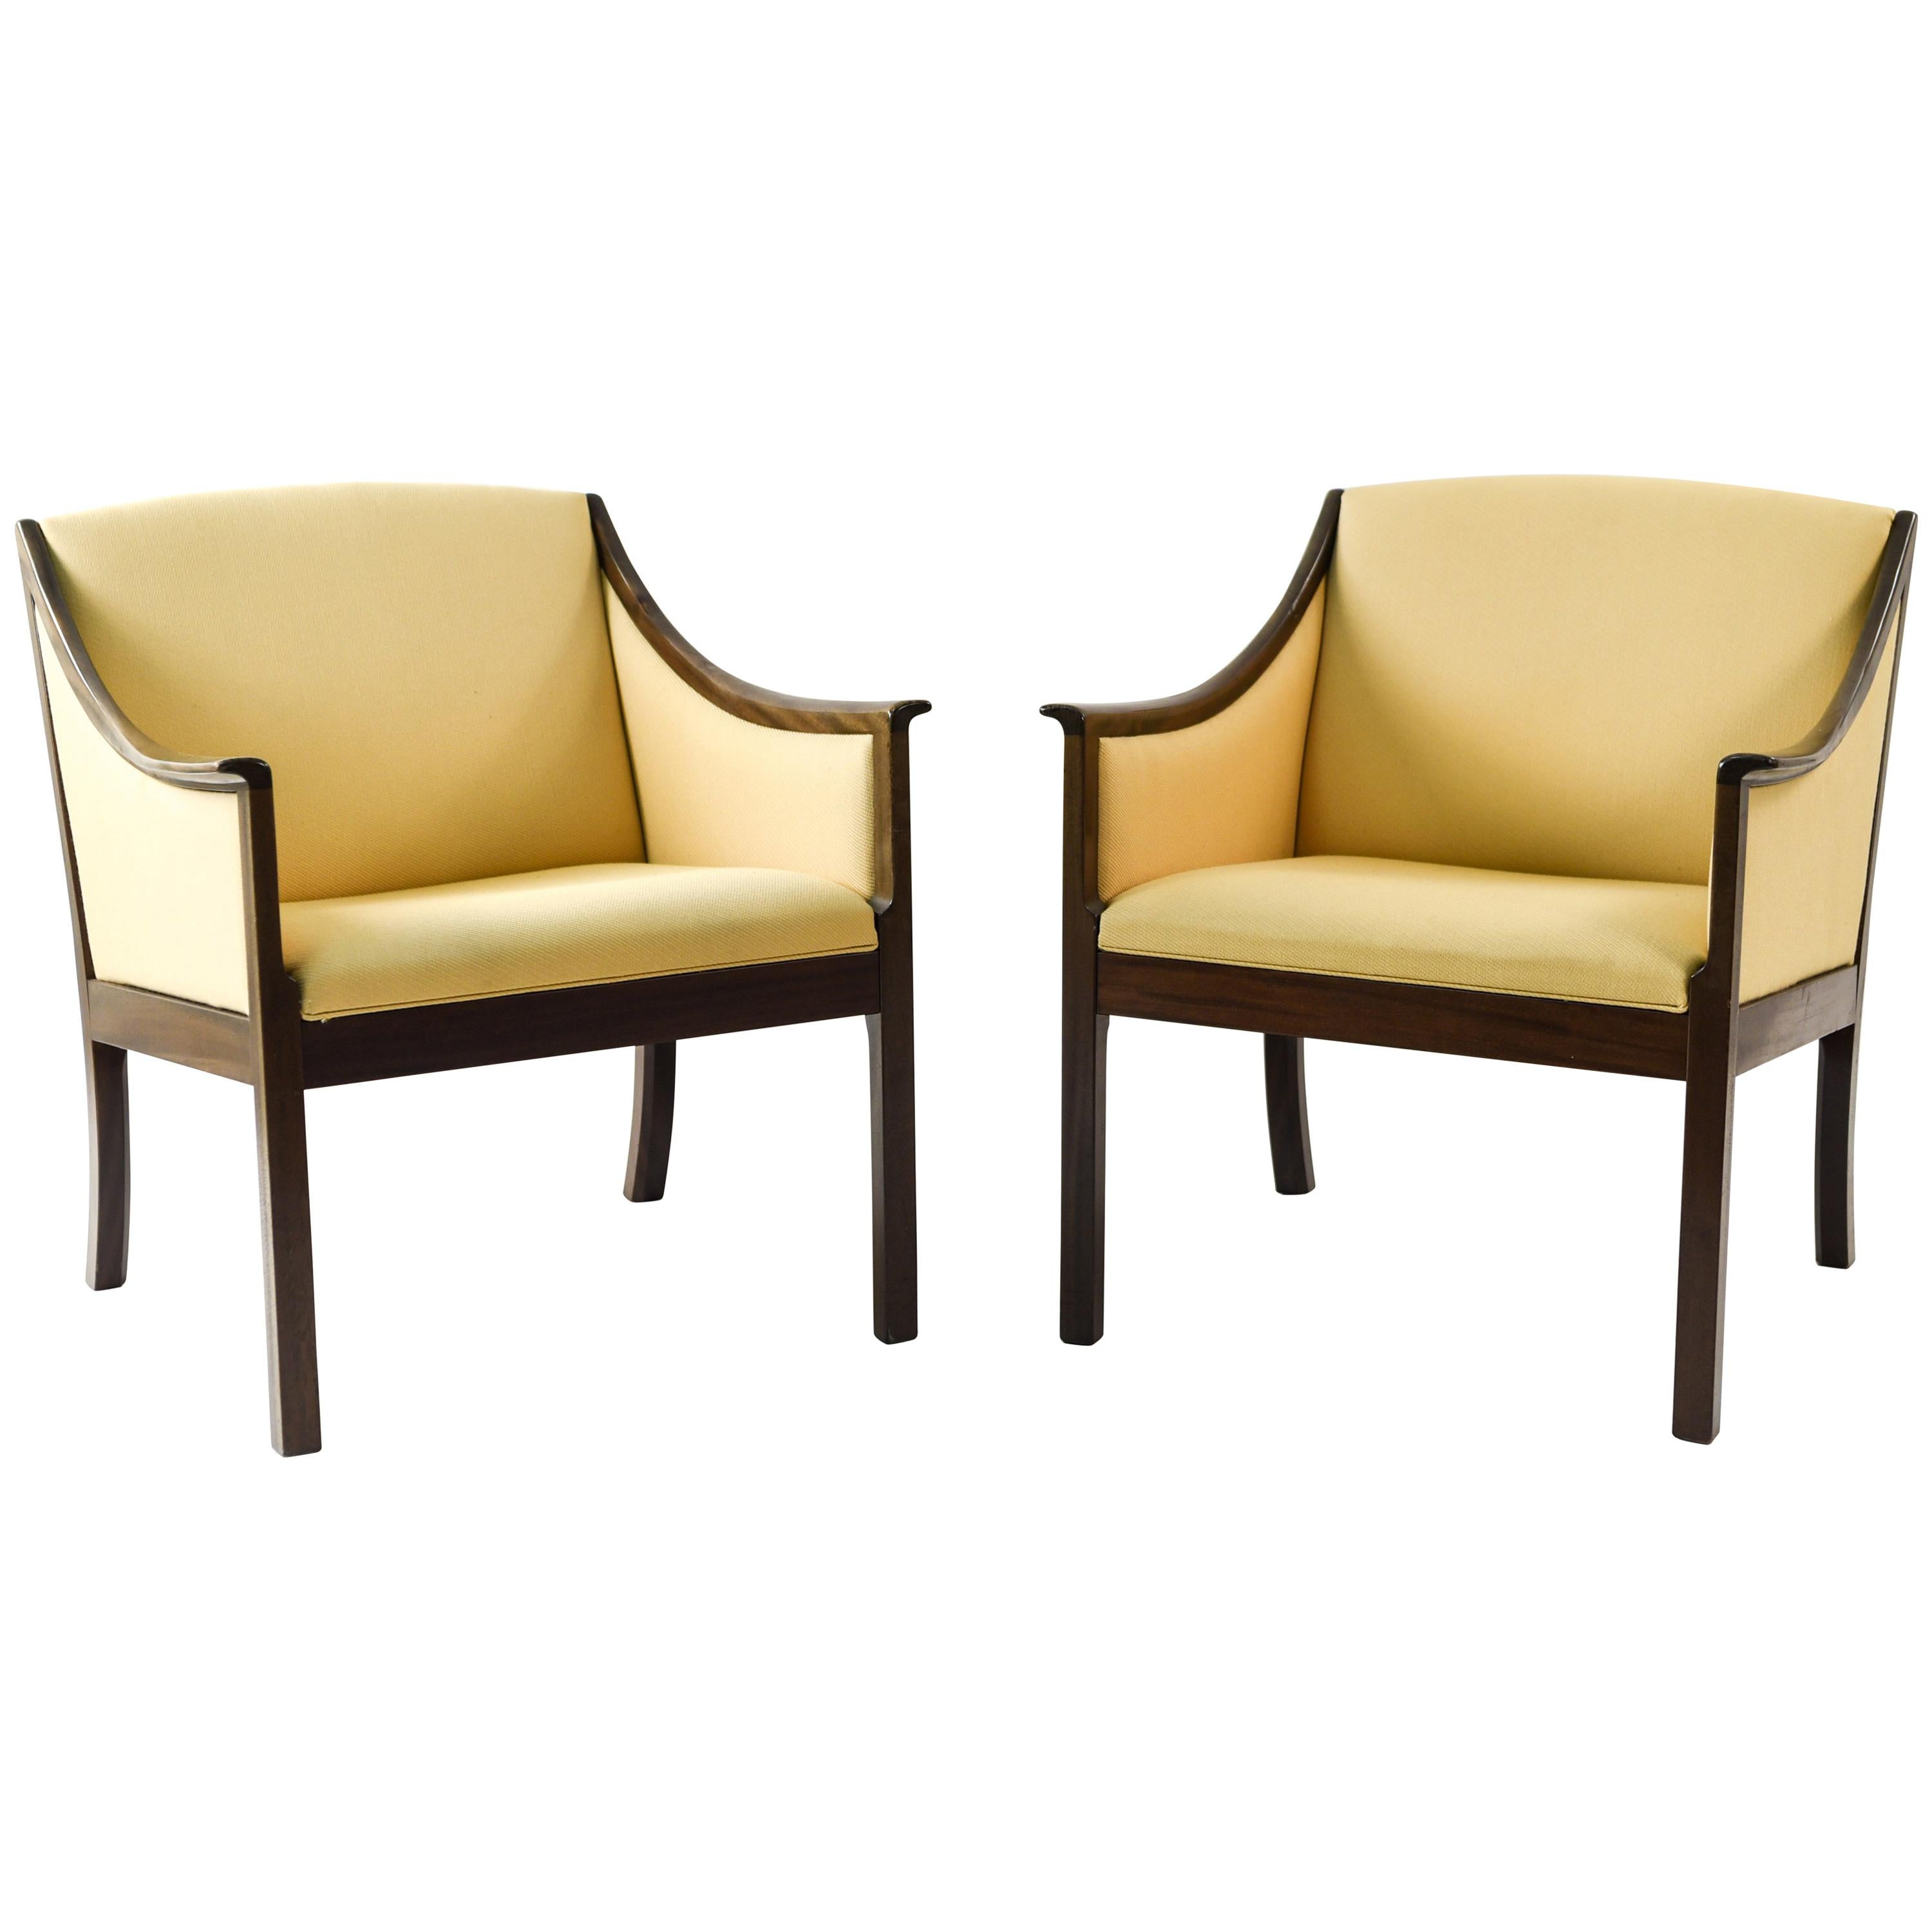 Ole Wanscher for Poul Jeppesen Pair of Mahogany Lounge Chairs